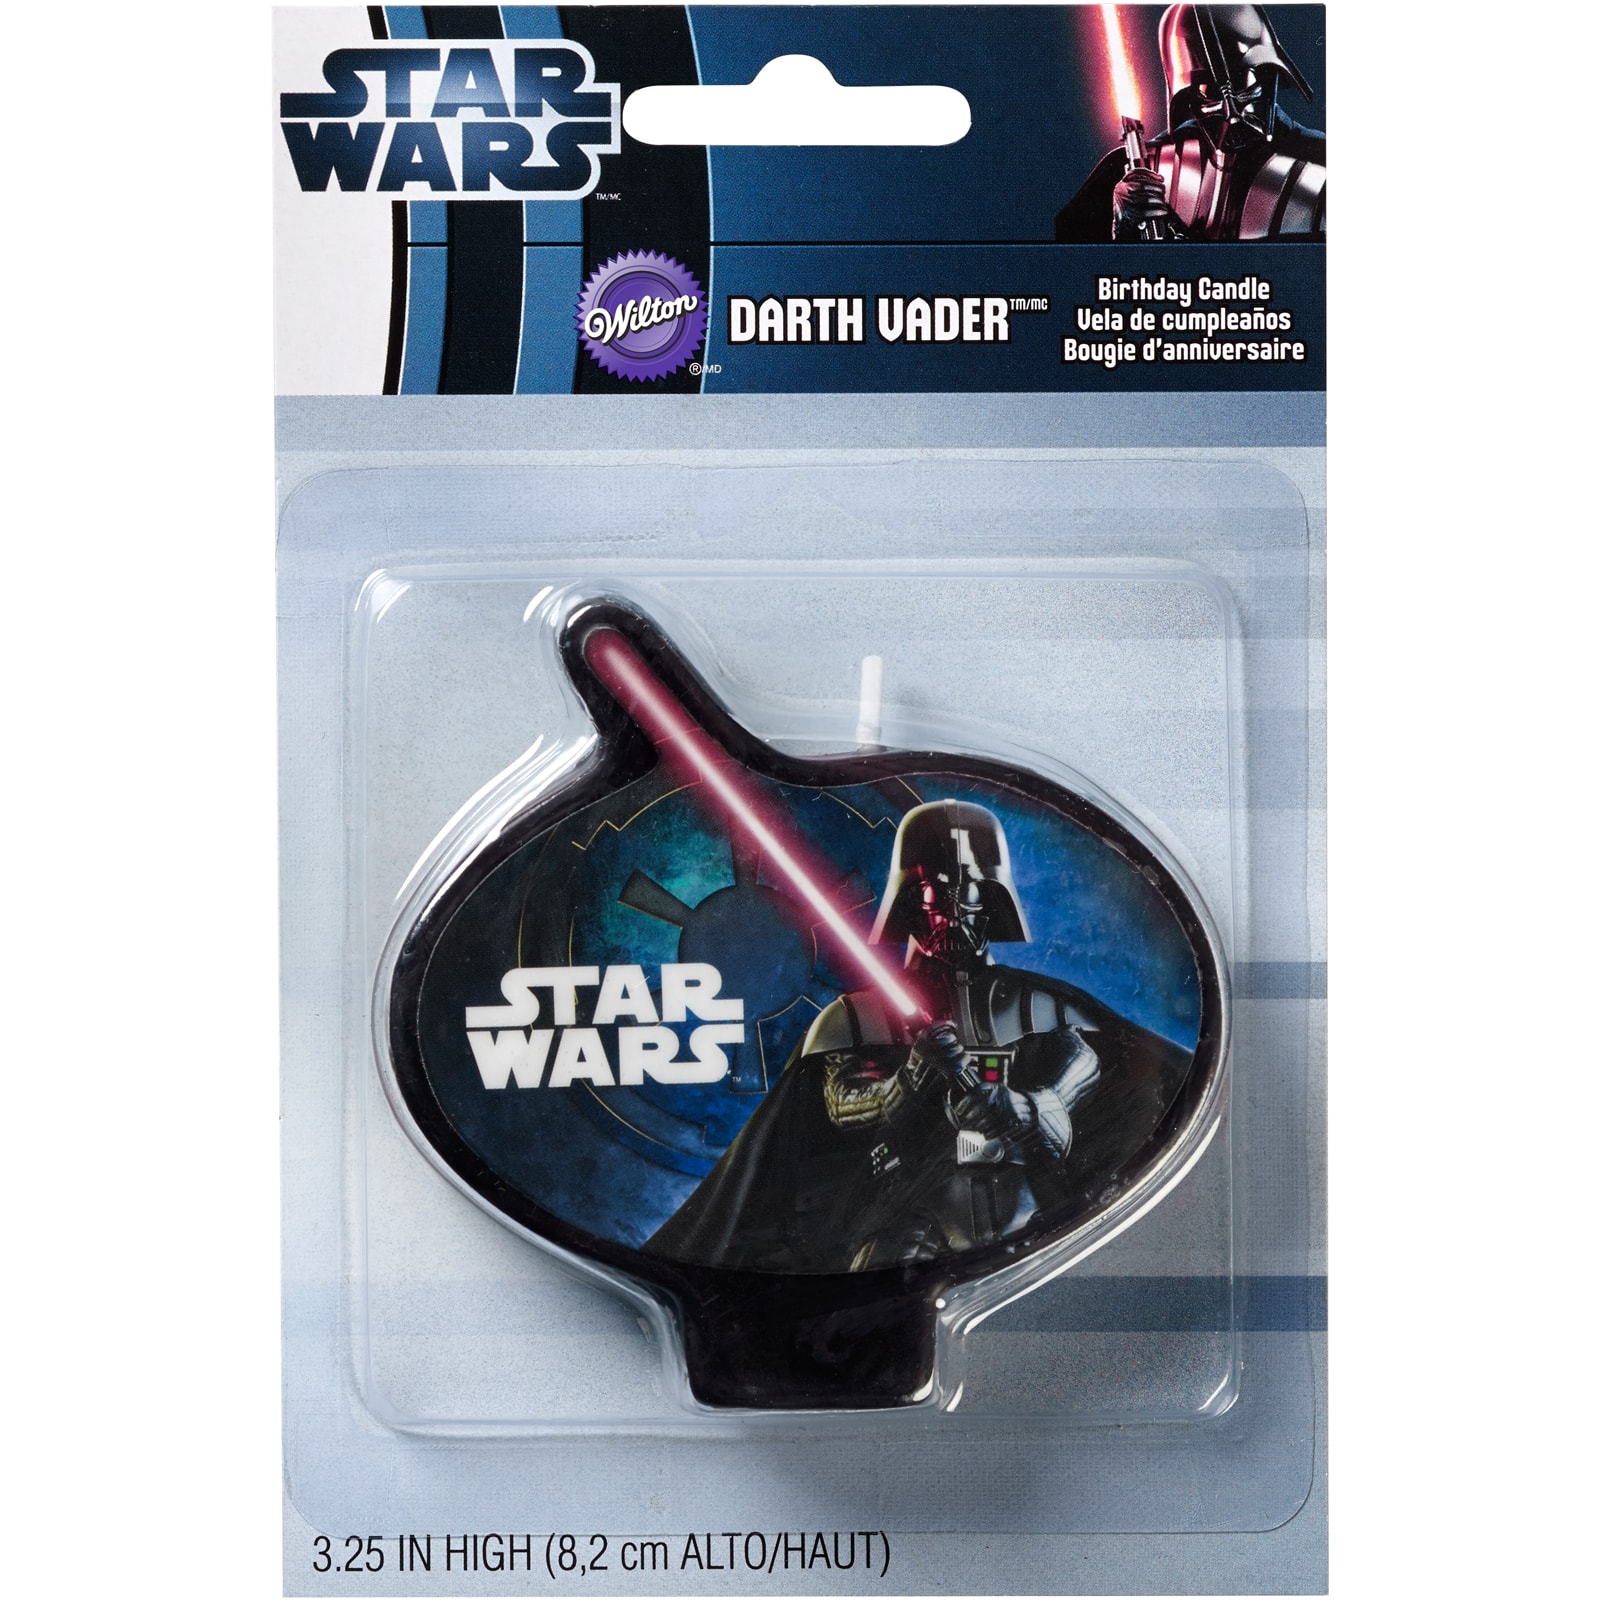 Buy The Wilton Darth Vader Star Wars Candle At Michaels